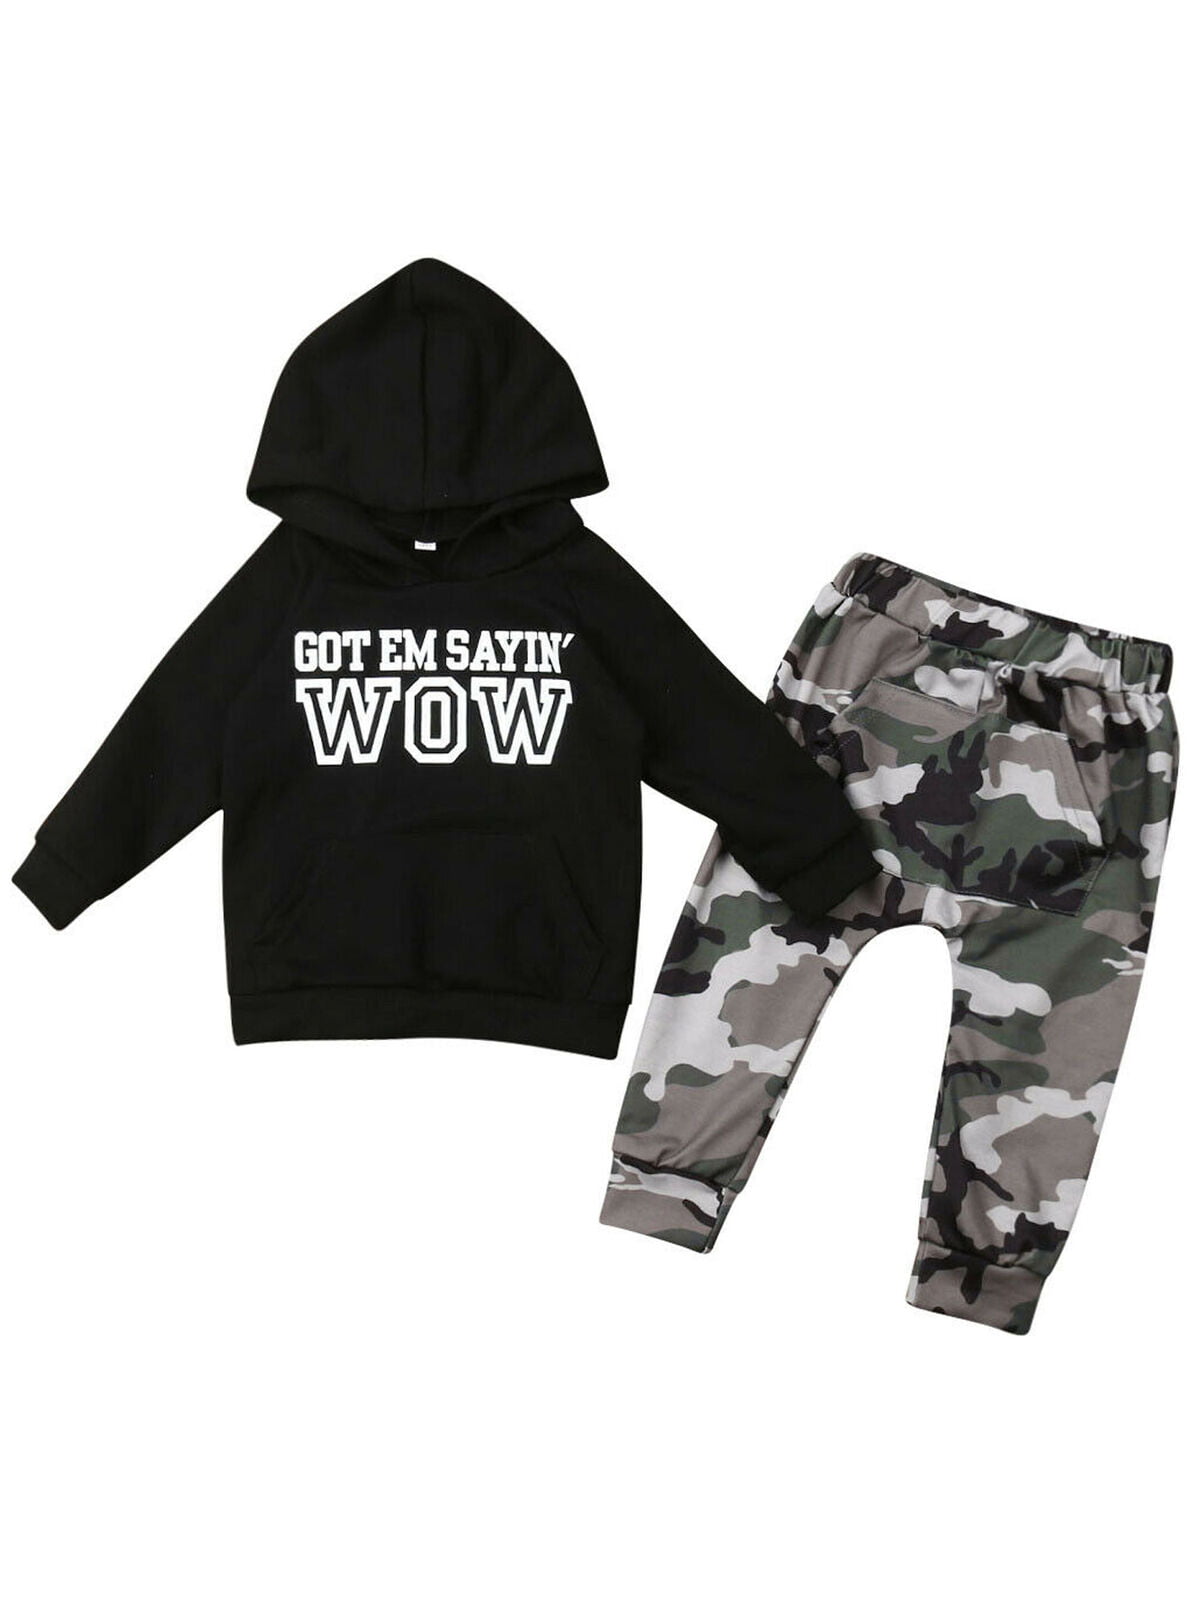 Baby Toddler Boys Autumn Clothes Outfits for 1-5 Years Old Child Long Sleeve Hooded Sweater Camouflage Pants Set